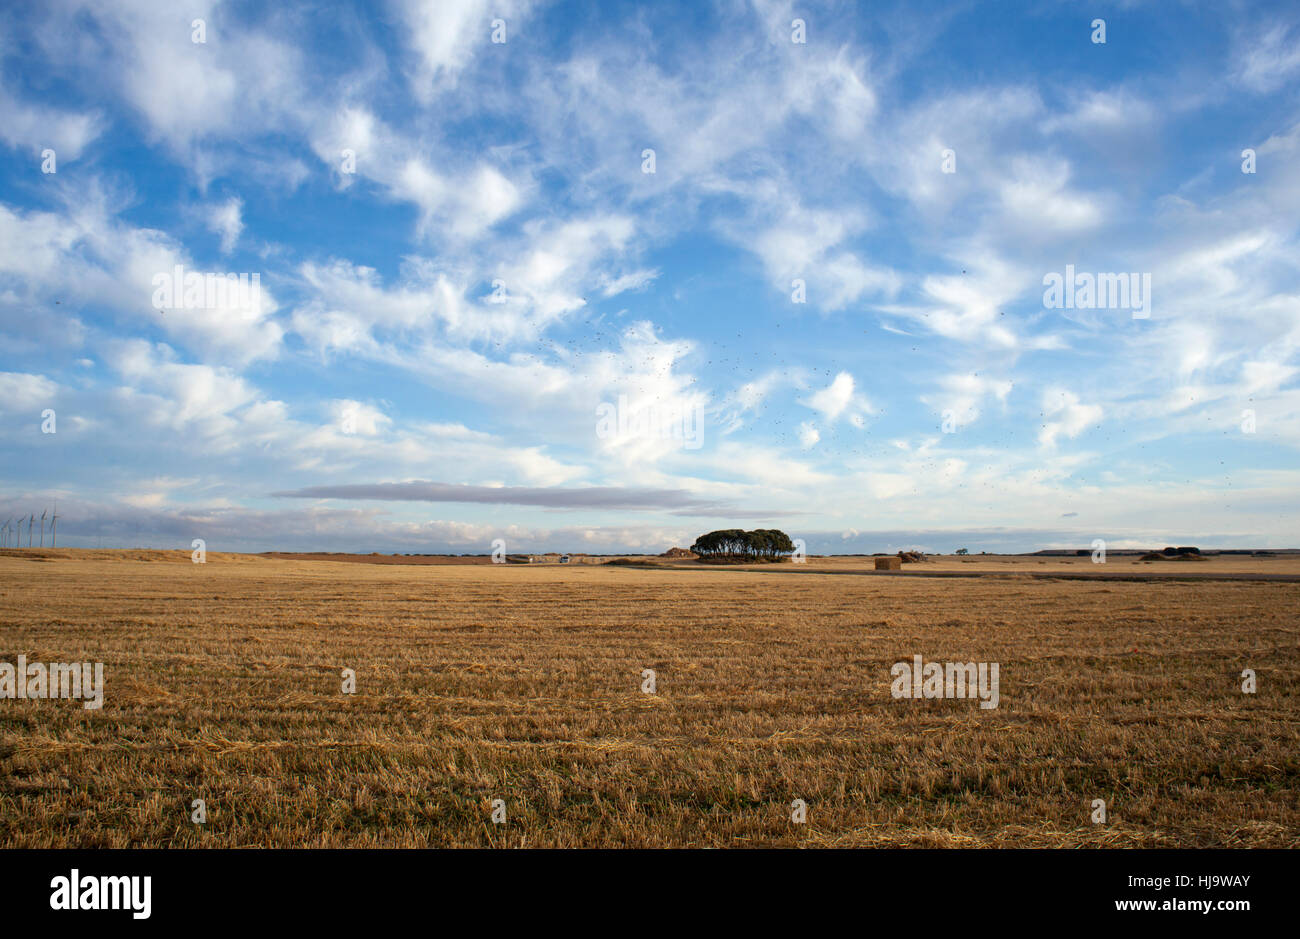 spain, country, scene, location, site, rural, scenery, countryside, nature, Stock Photo